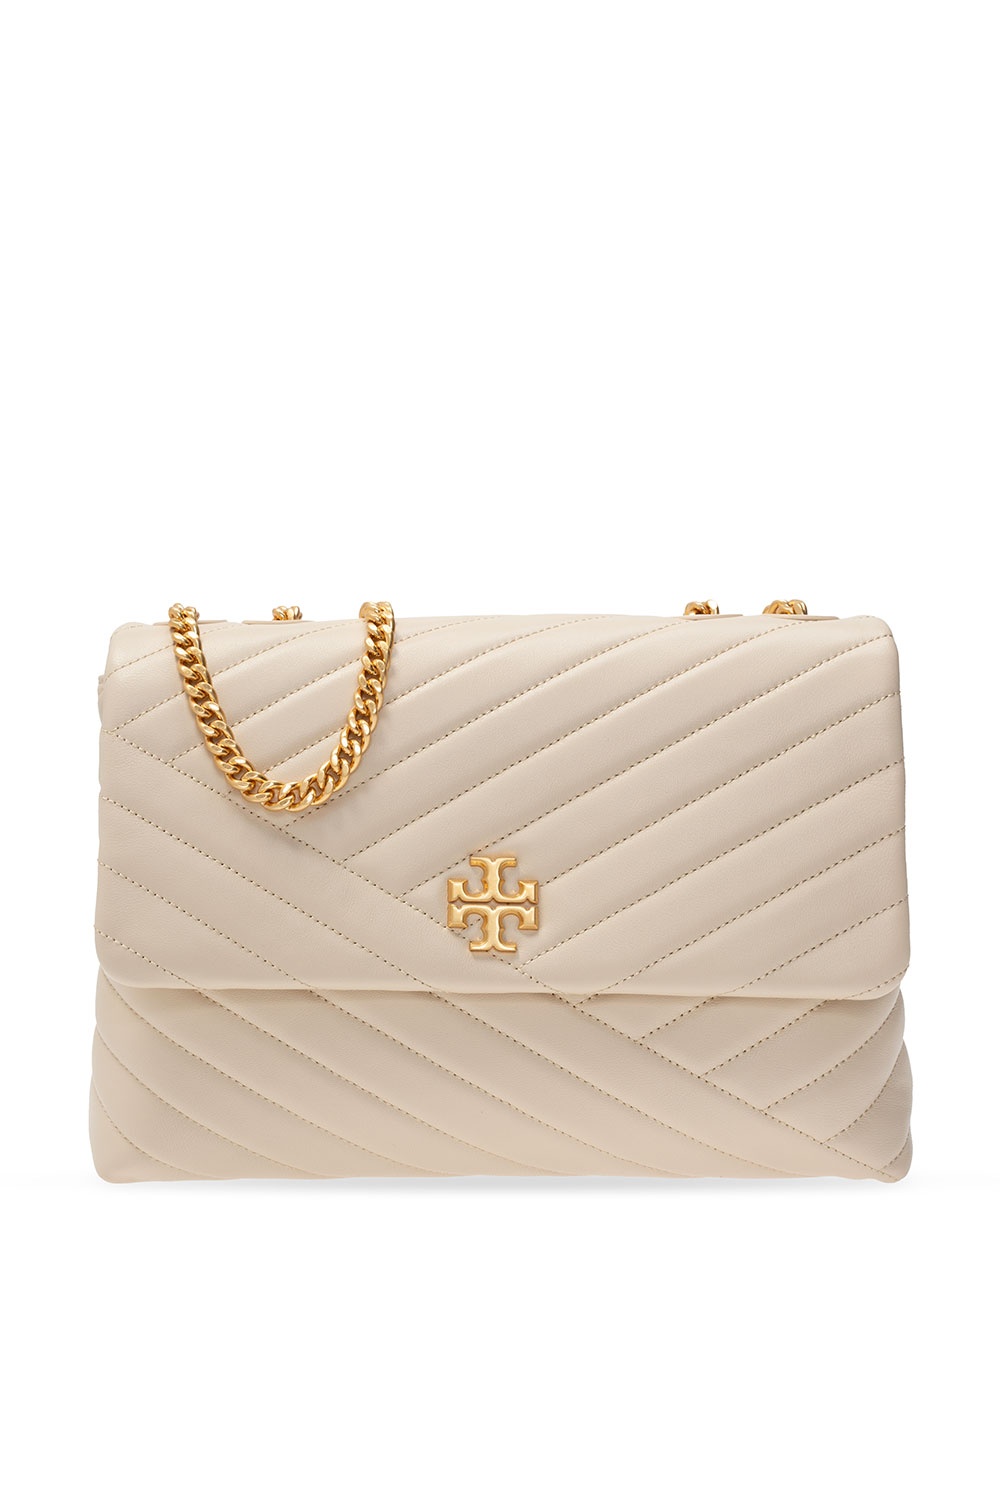 TORY BURCH KIRA QUILTED LEATHER SMALL SHOULDER BAG Spring/Summer